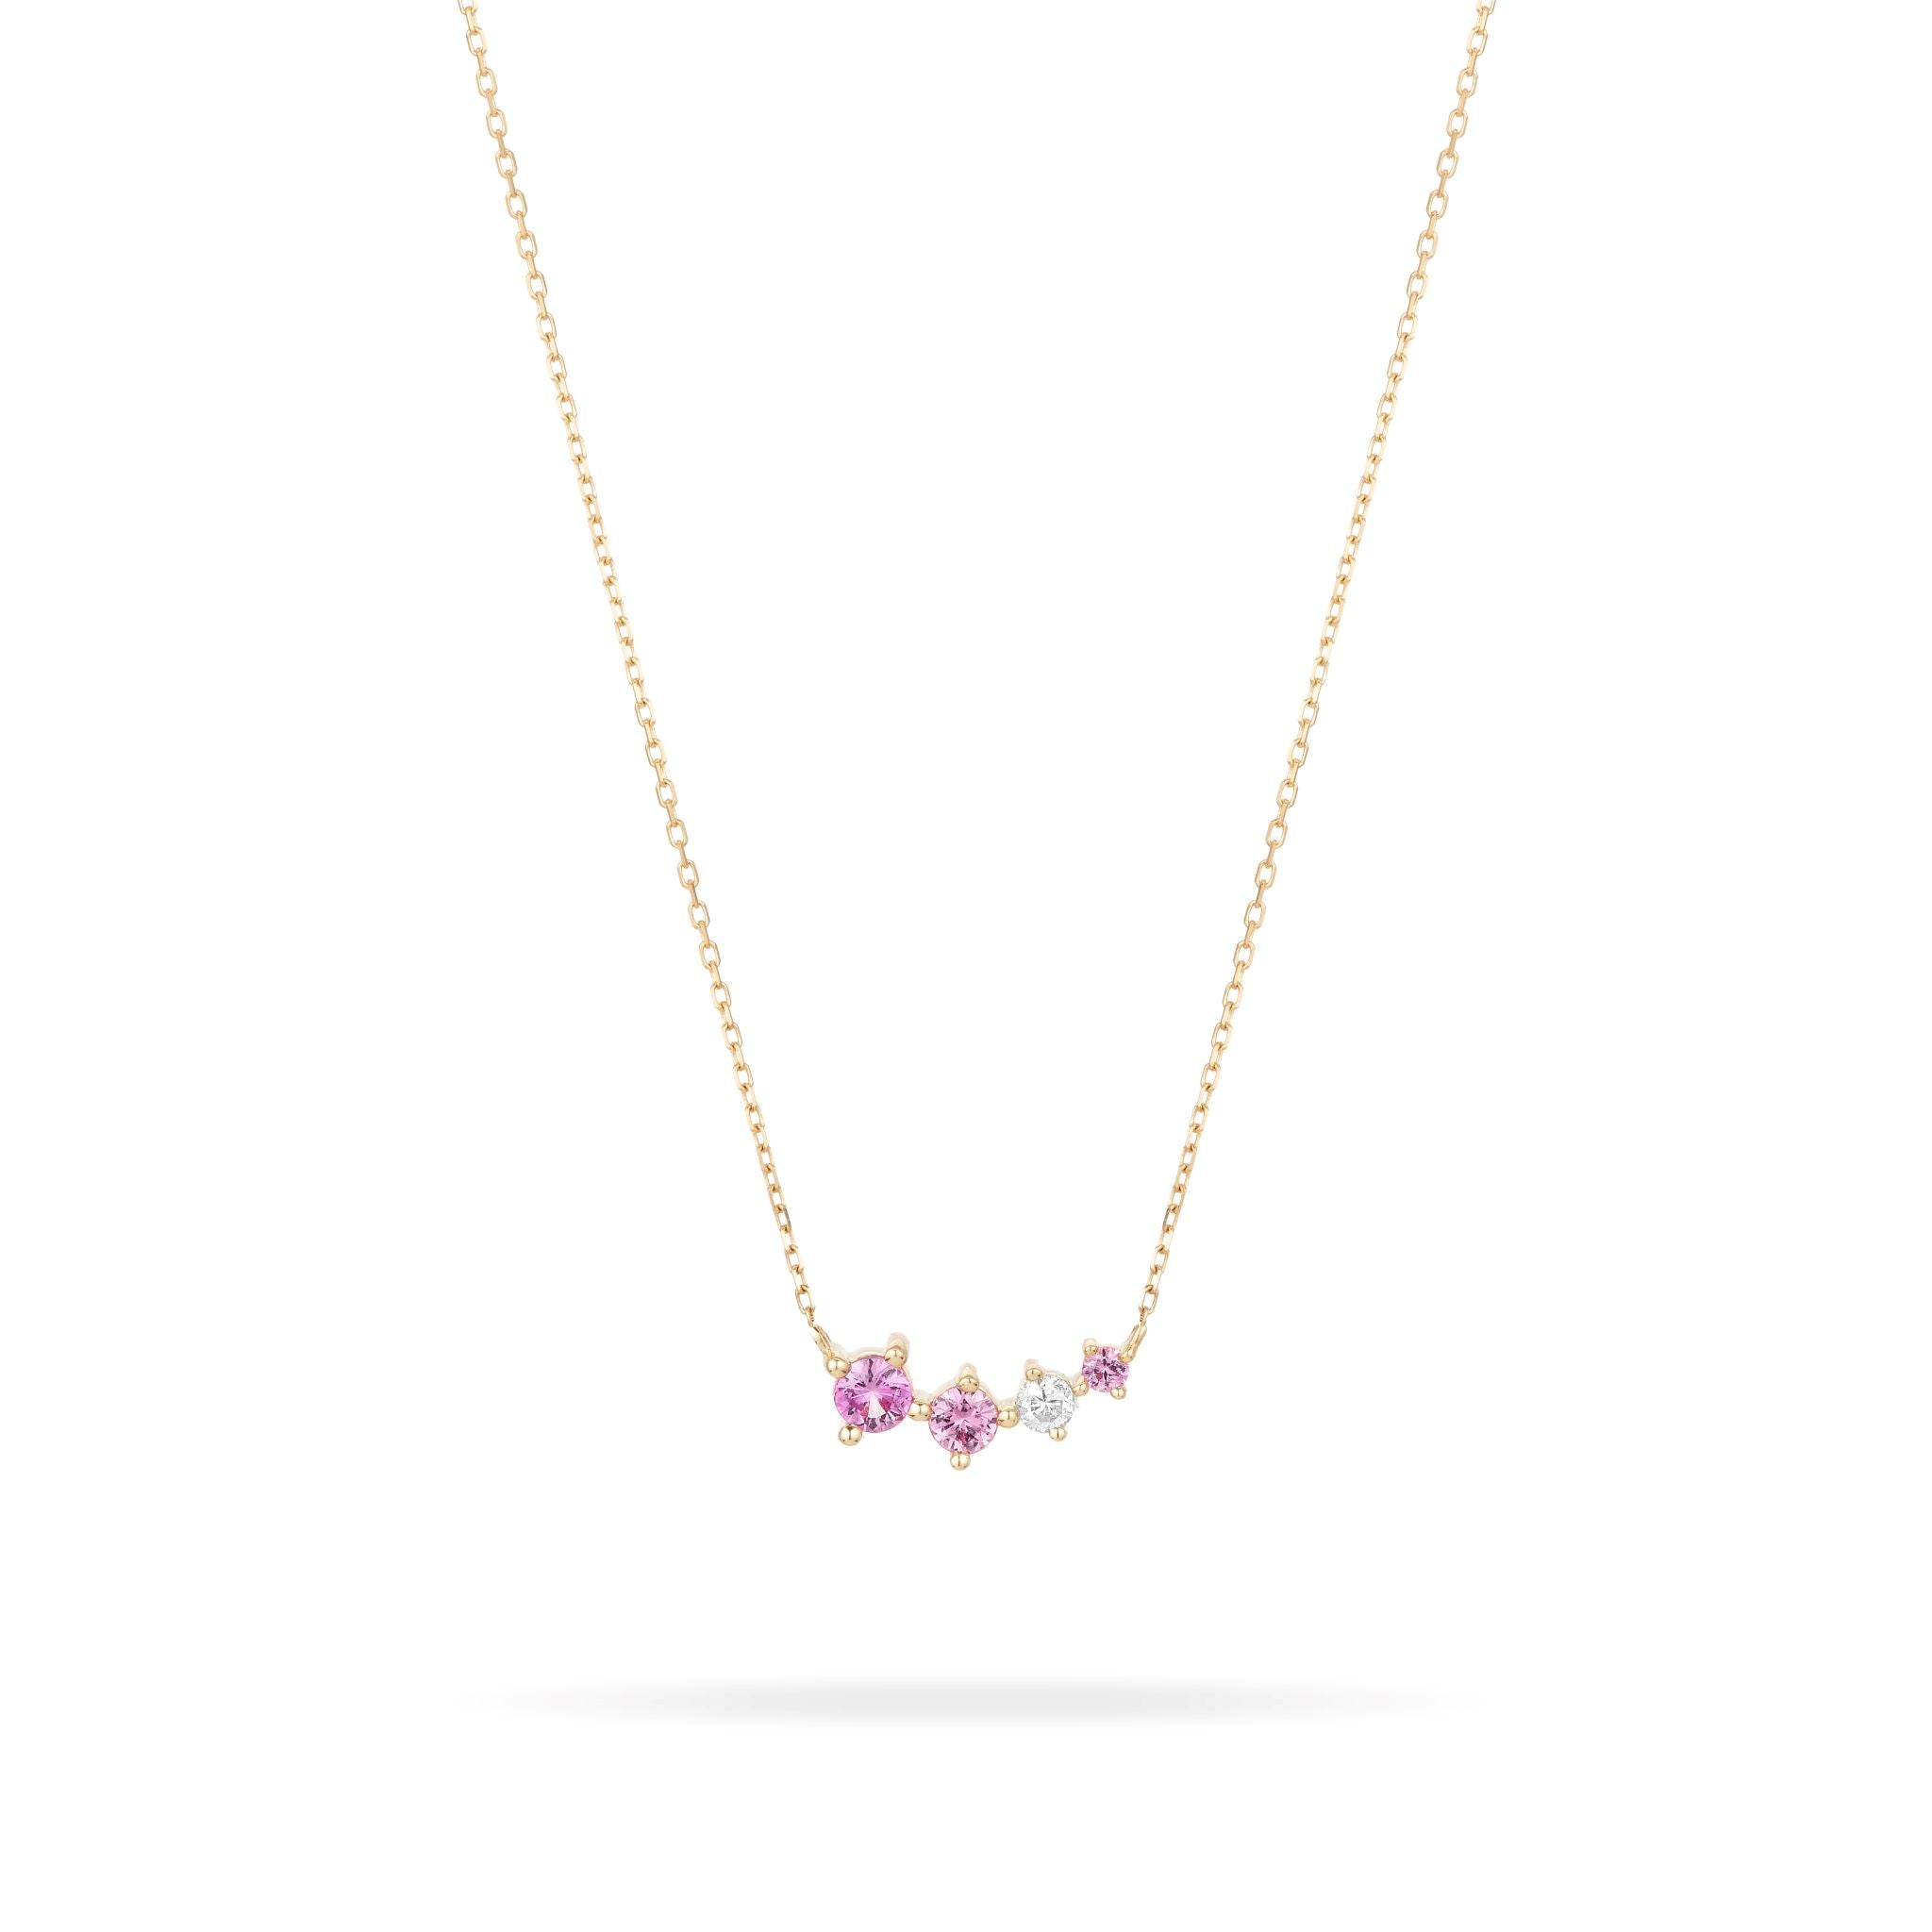 Pink sapphire and diamond necklace, Important Jewels